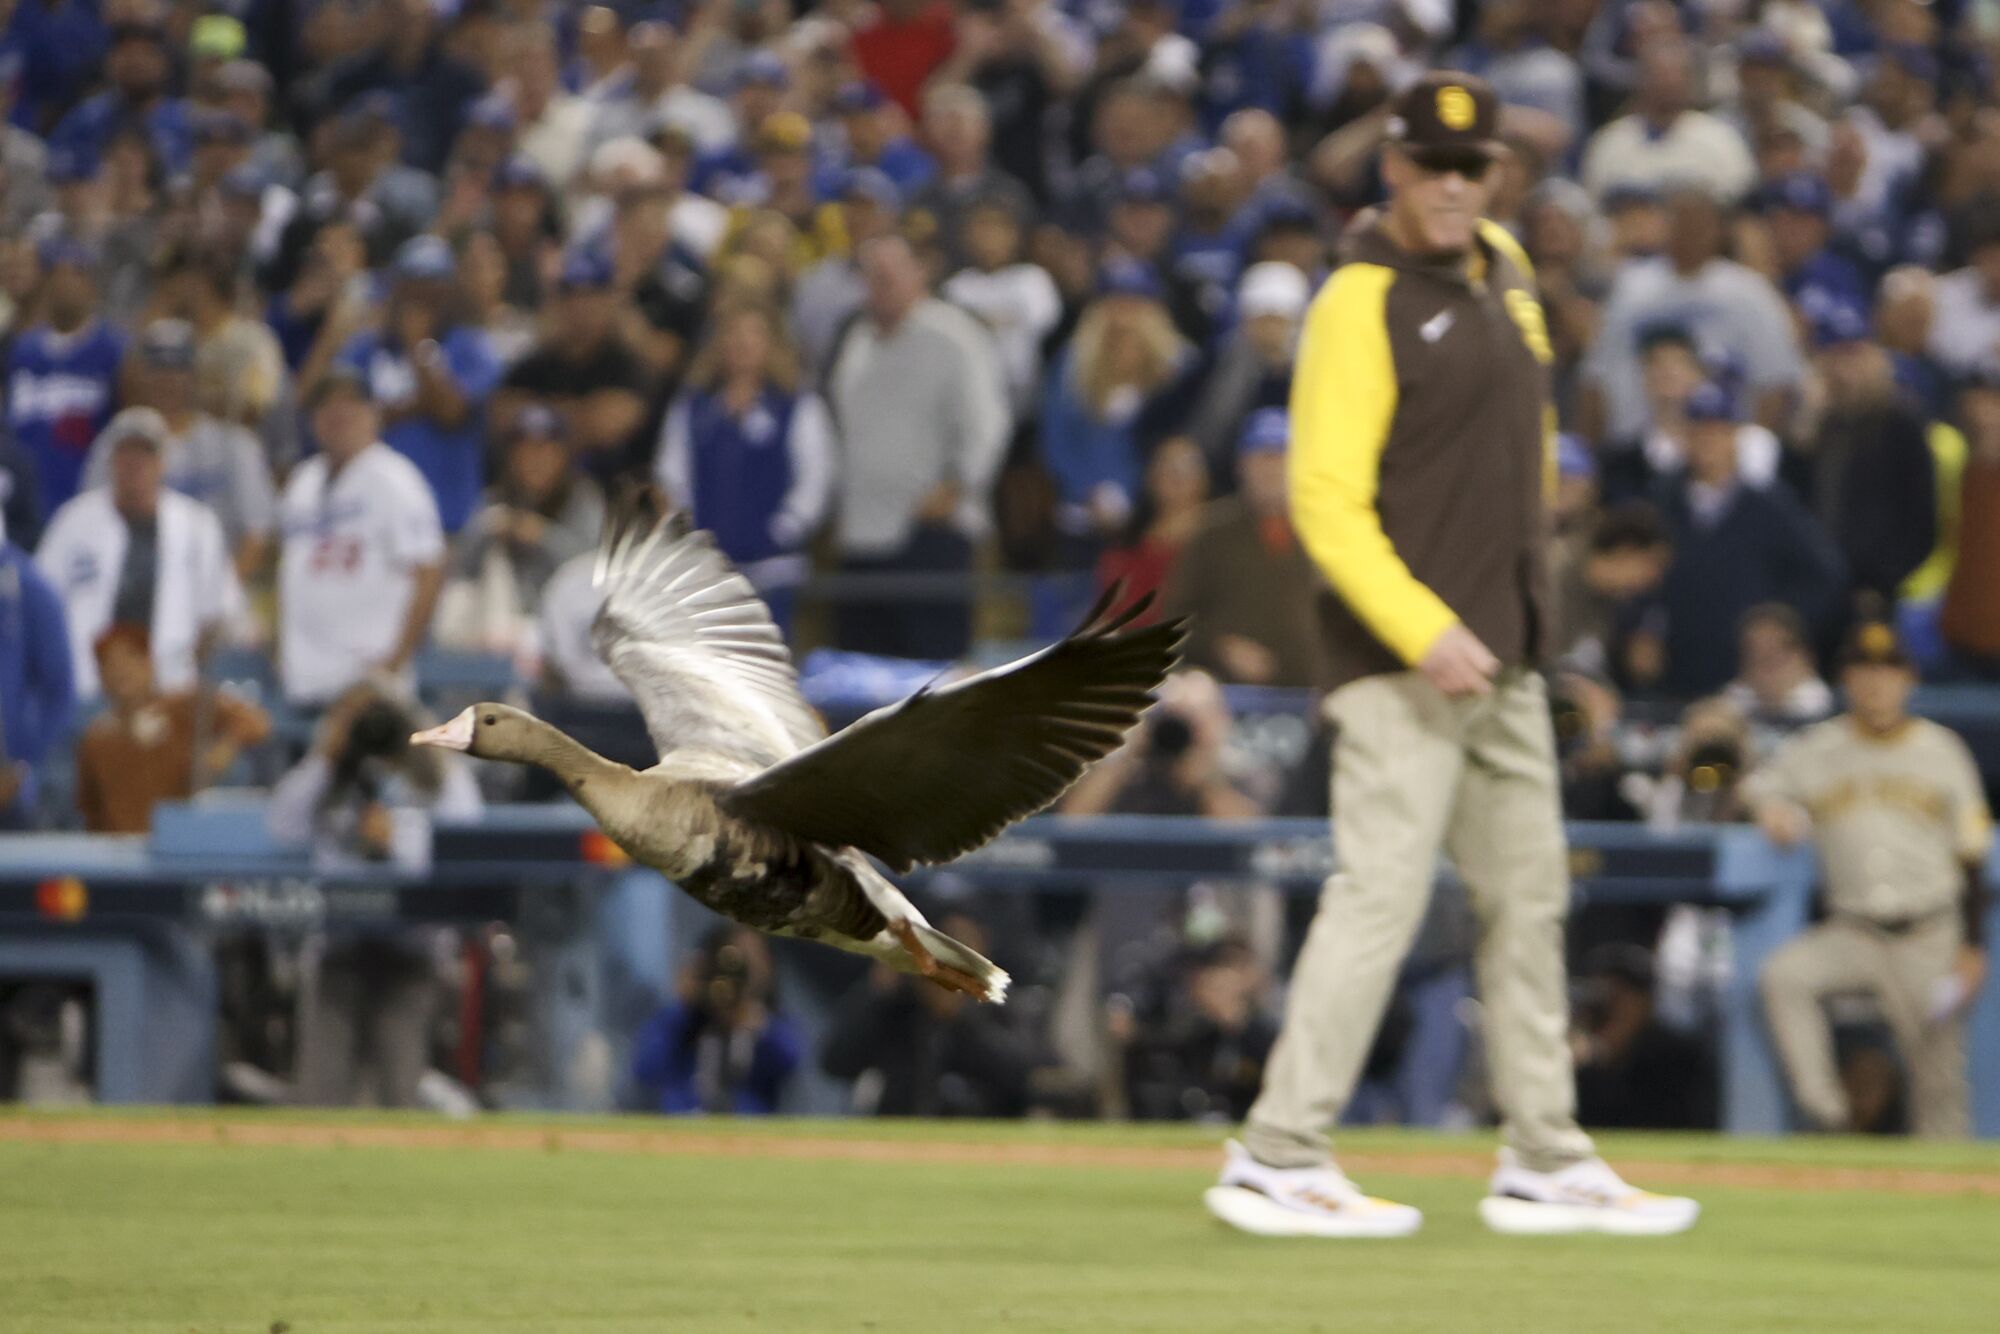 During the eighth inning, a goose is chased off the field